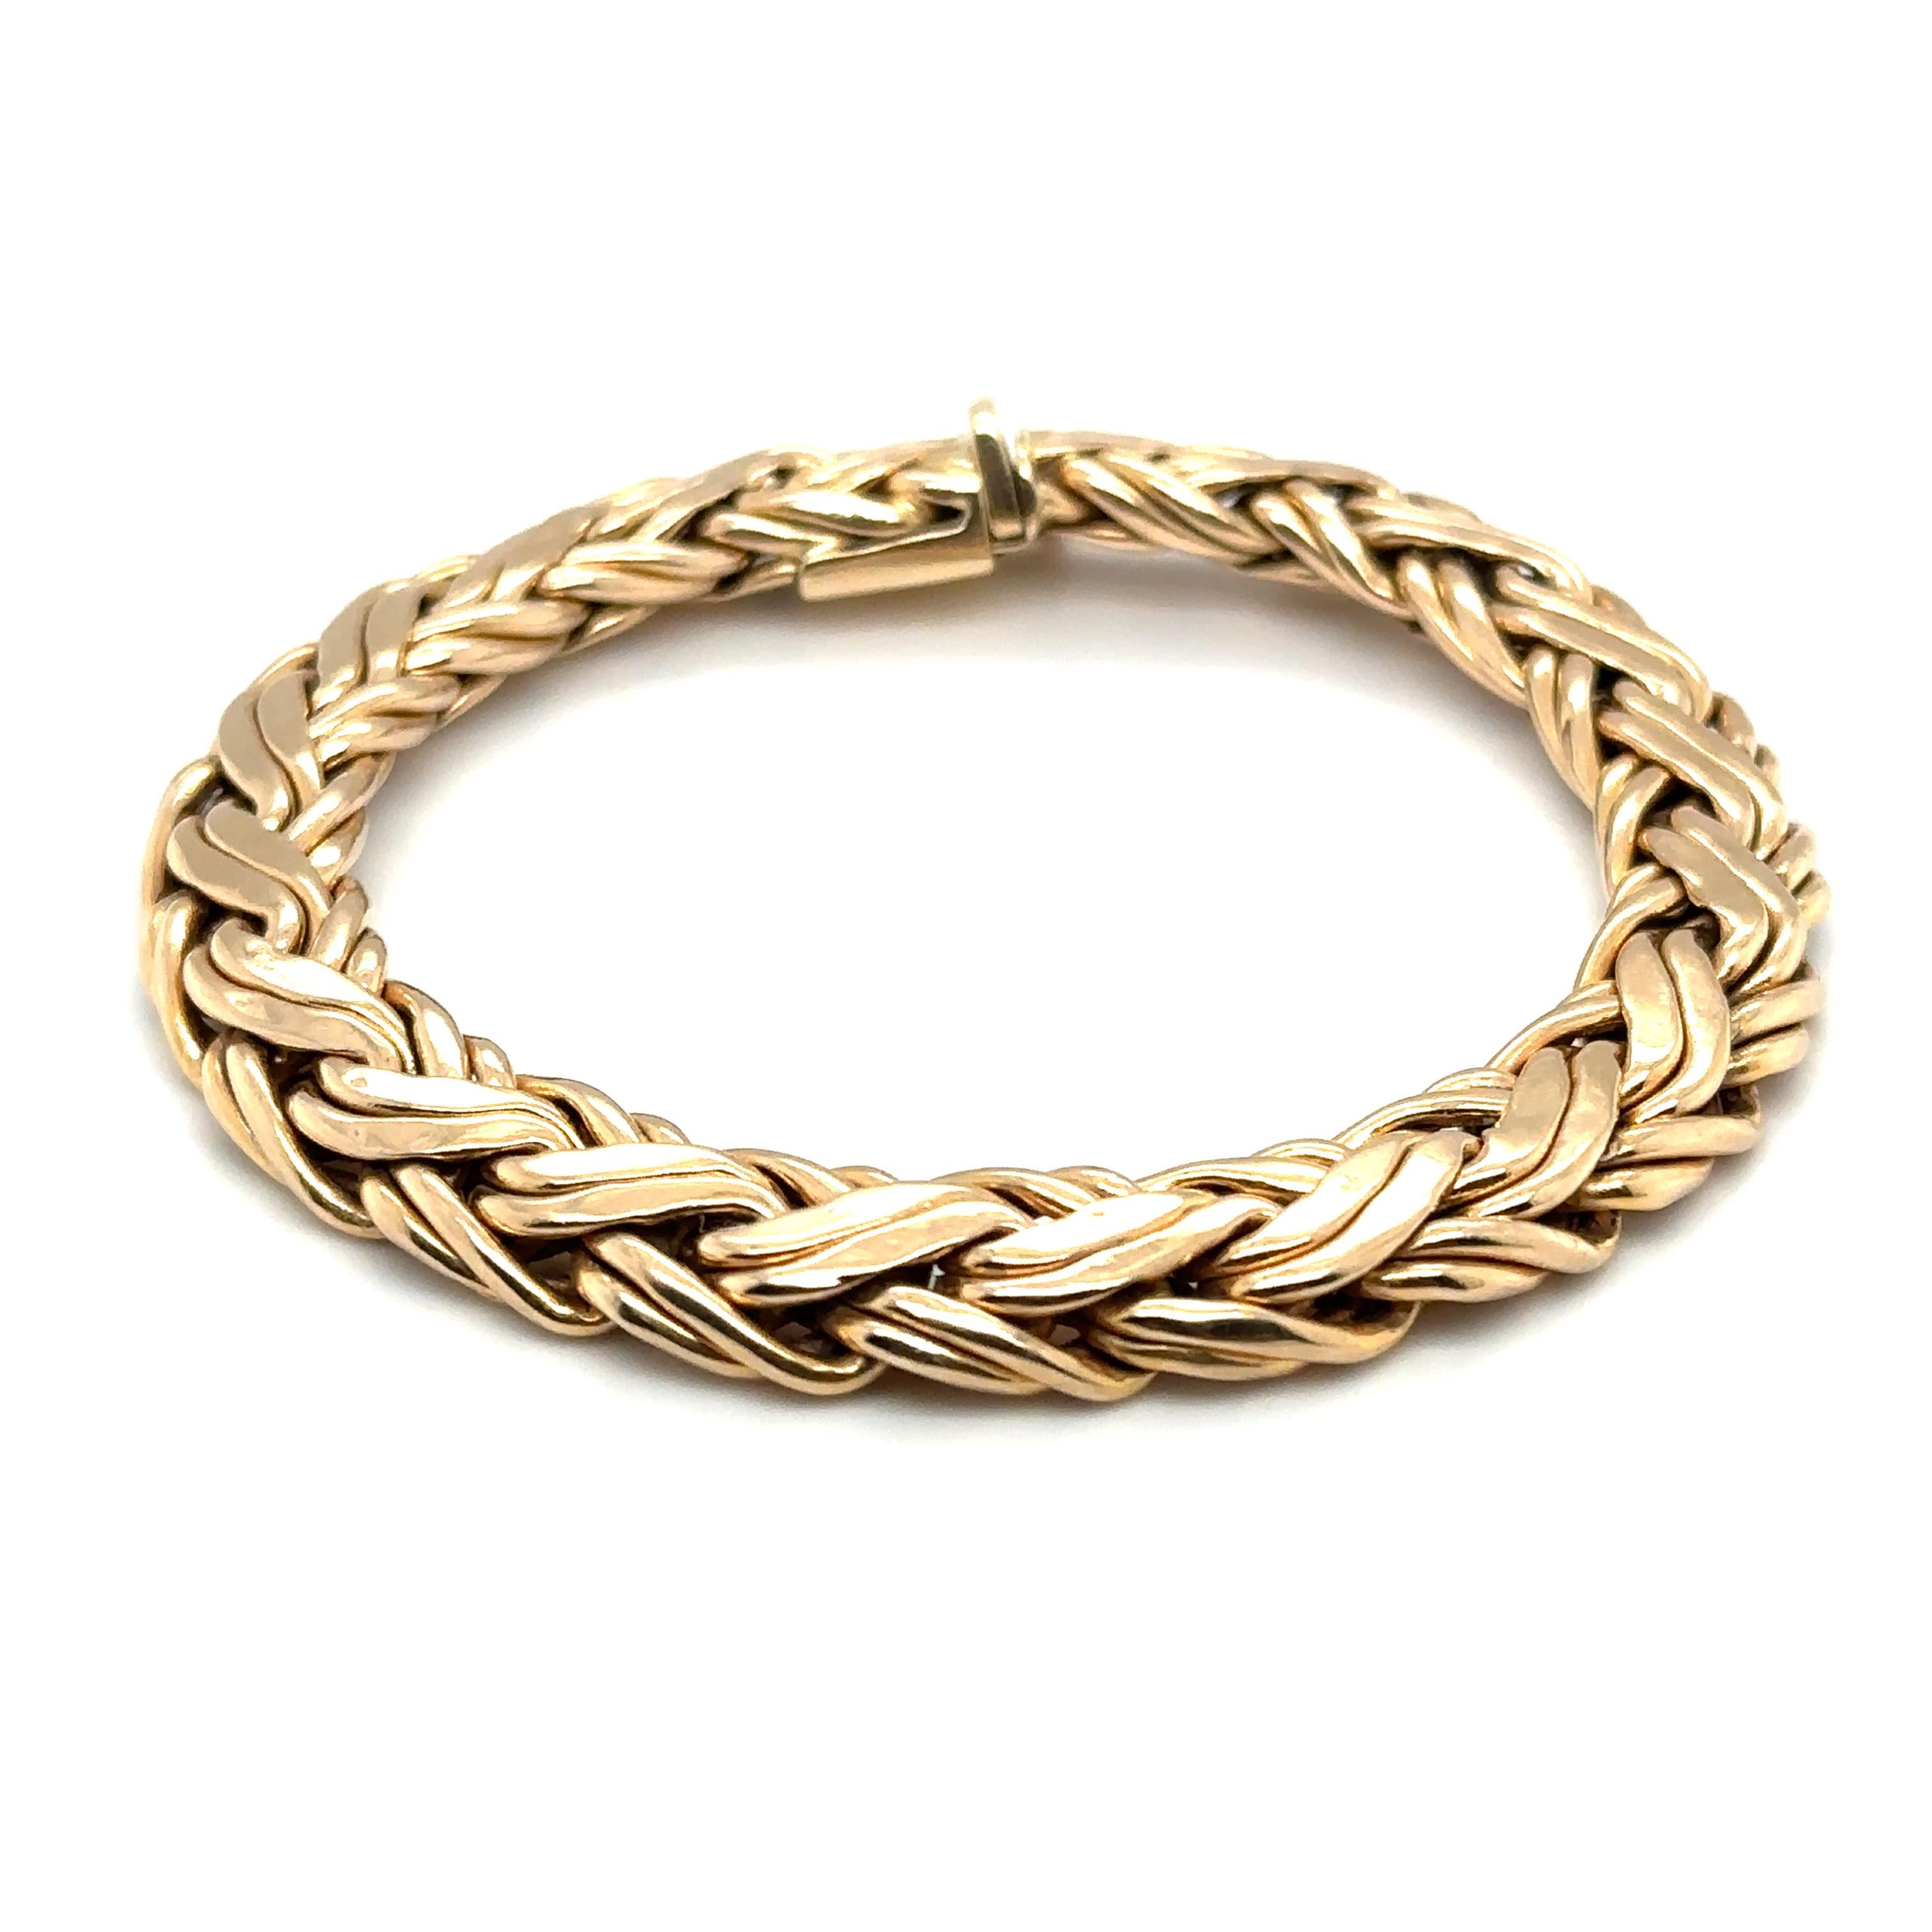 Item Details: This beautiful vintage bracelet has a woven Byzantine style chain design and is stamped with Tiffany & Co's maker mark. Crafted in 14 Karat Yellow Gold, it is a stunning bracelet, dating back to the 1980s! 

Circa: 1980s
Metal Type: 14